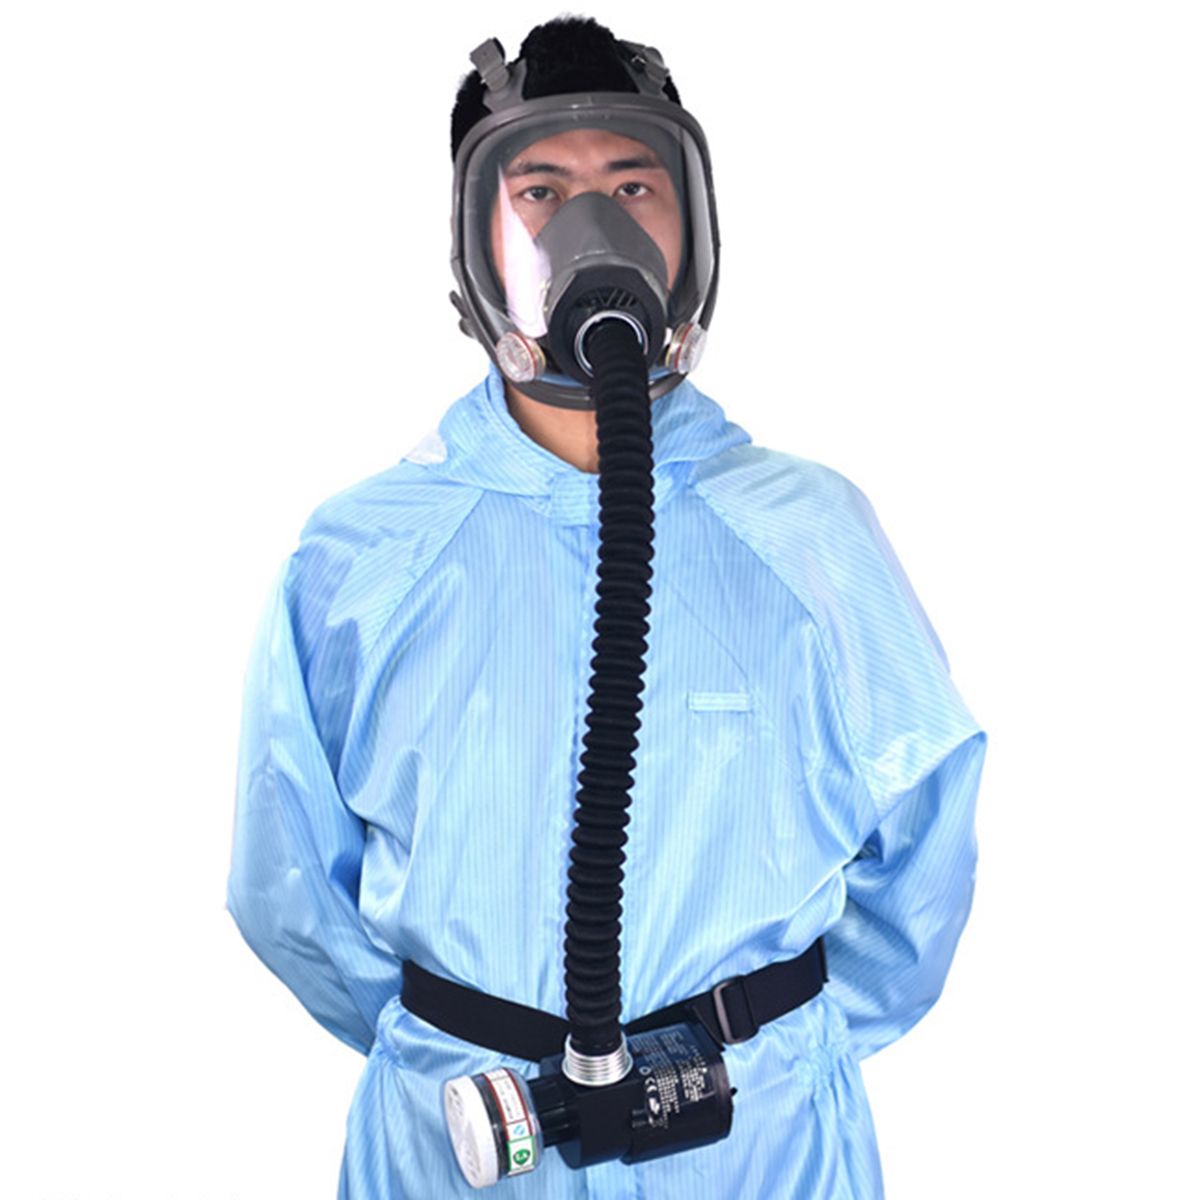 Electric-Constant-Flow-Supplied-Air-Fed-Full-Face-Gas-Mask-Spray-Painting-Tool-Respirator-System-1326170